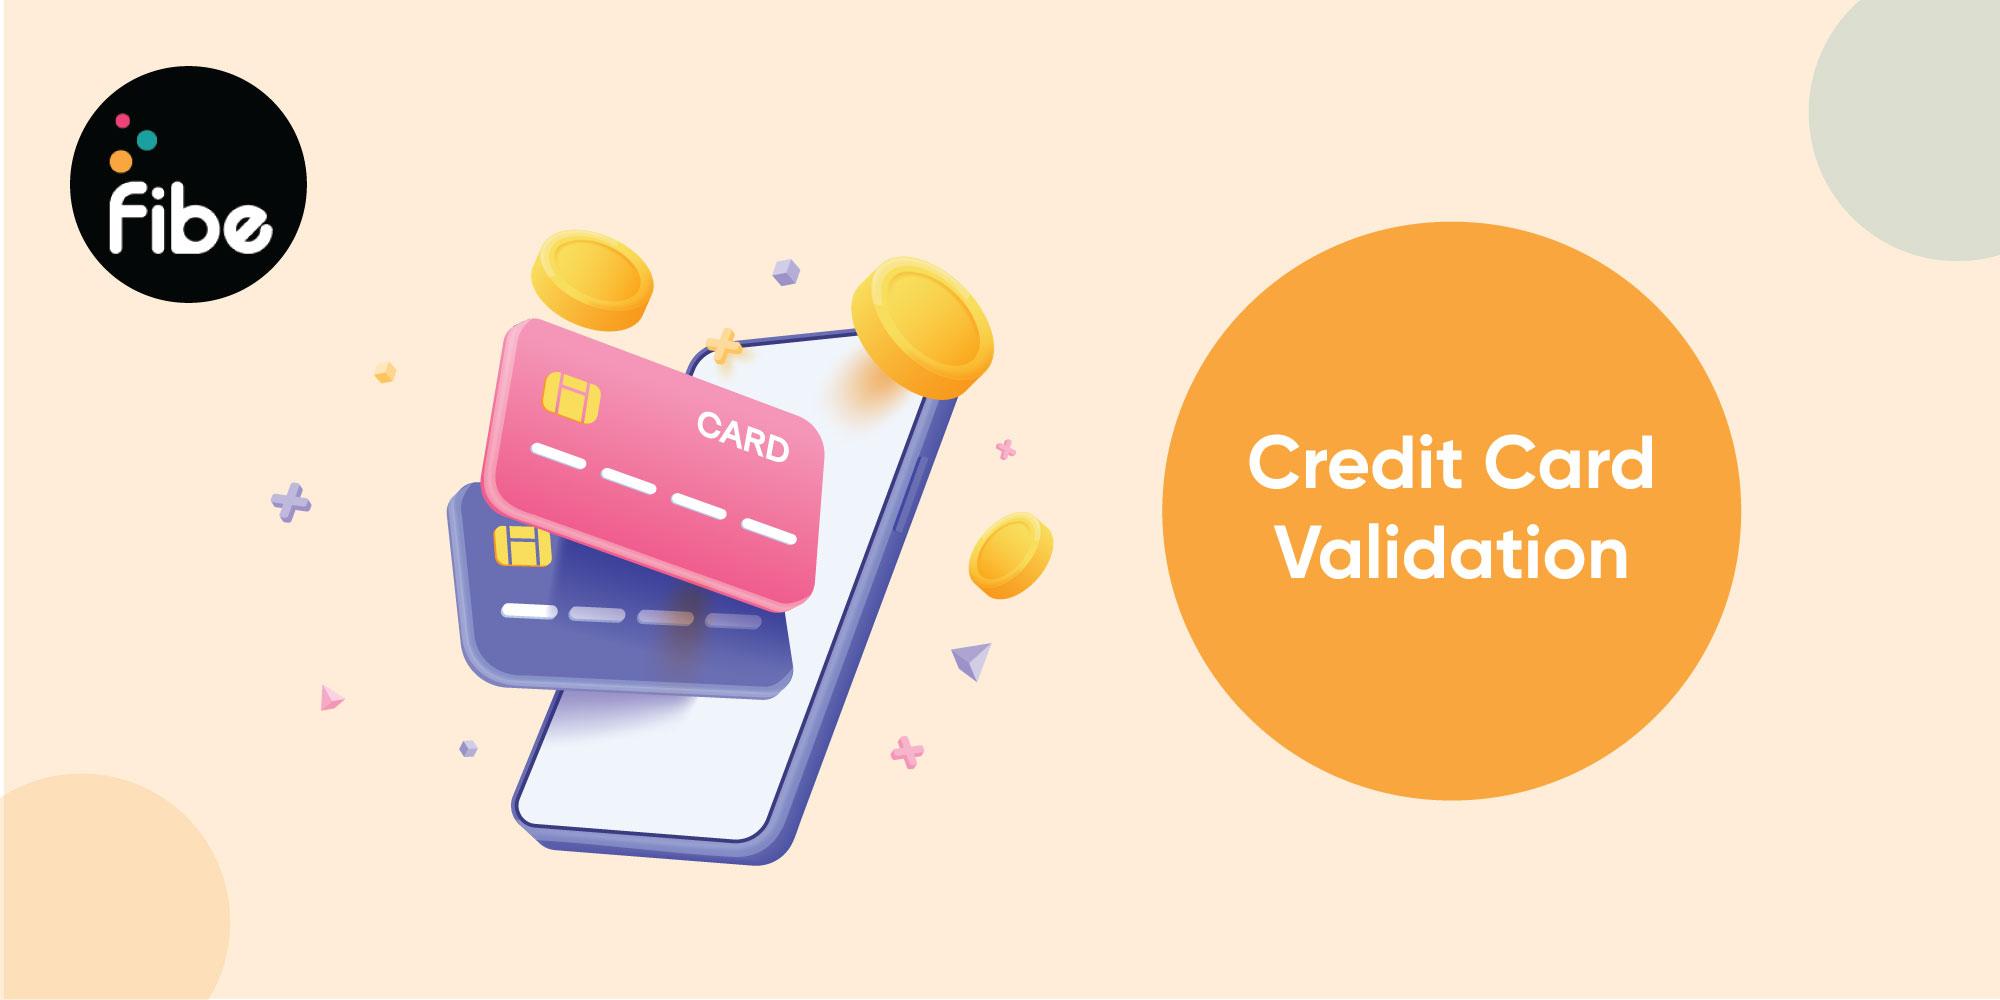 Credit Card Validation and Validators: What do you need to know?